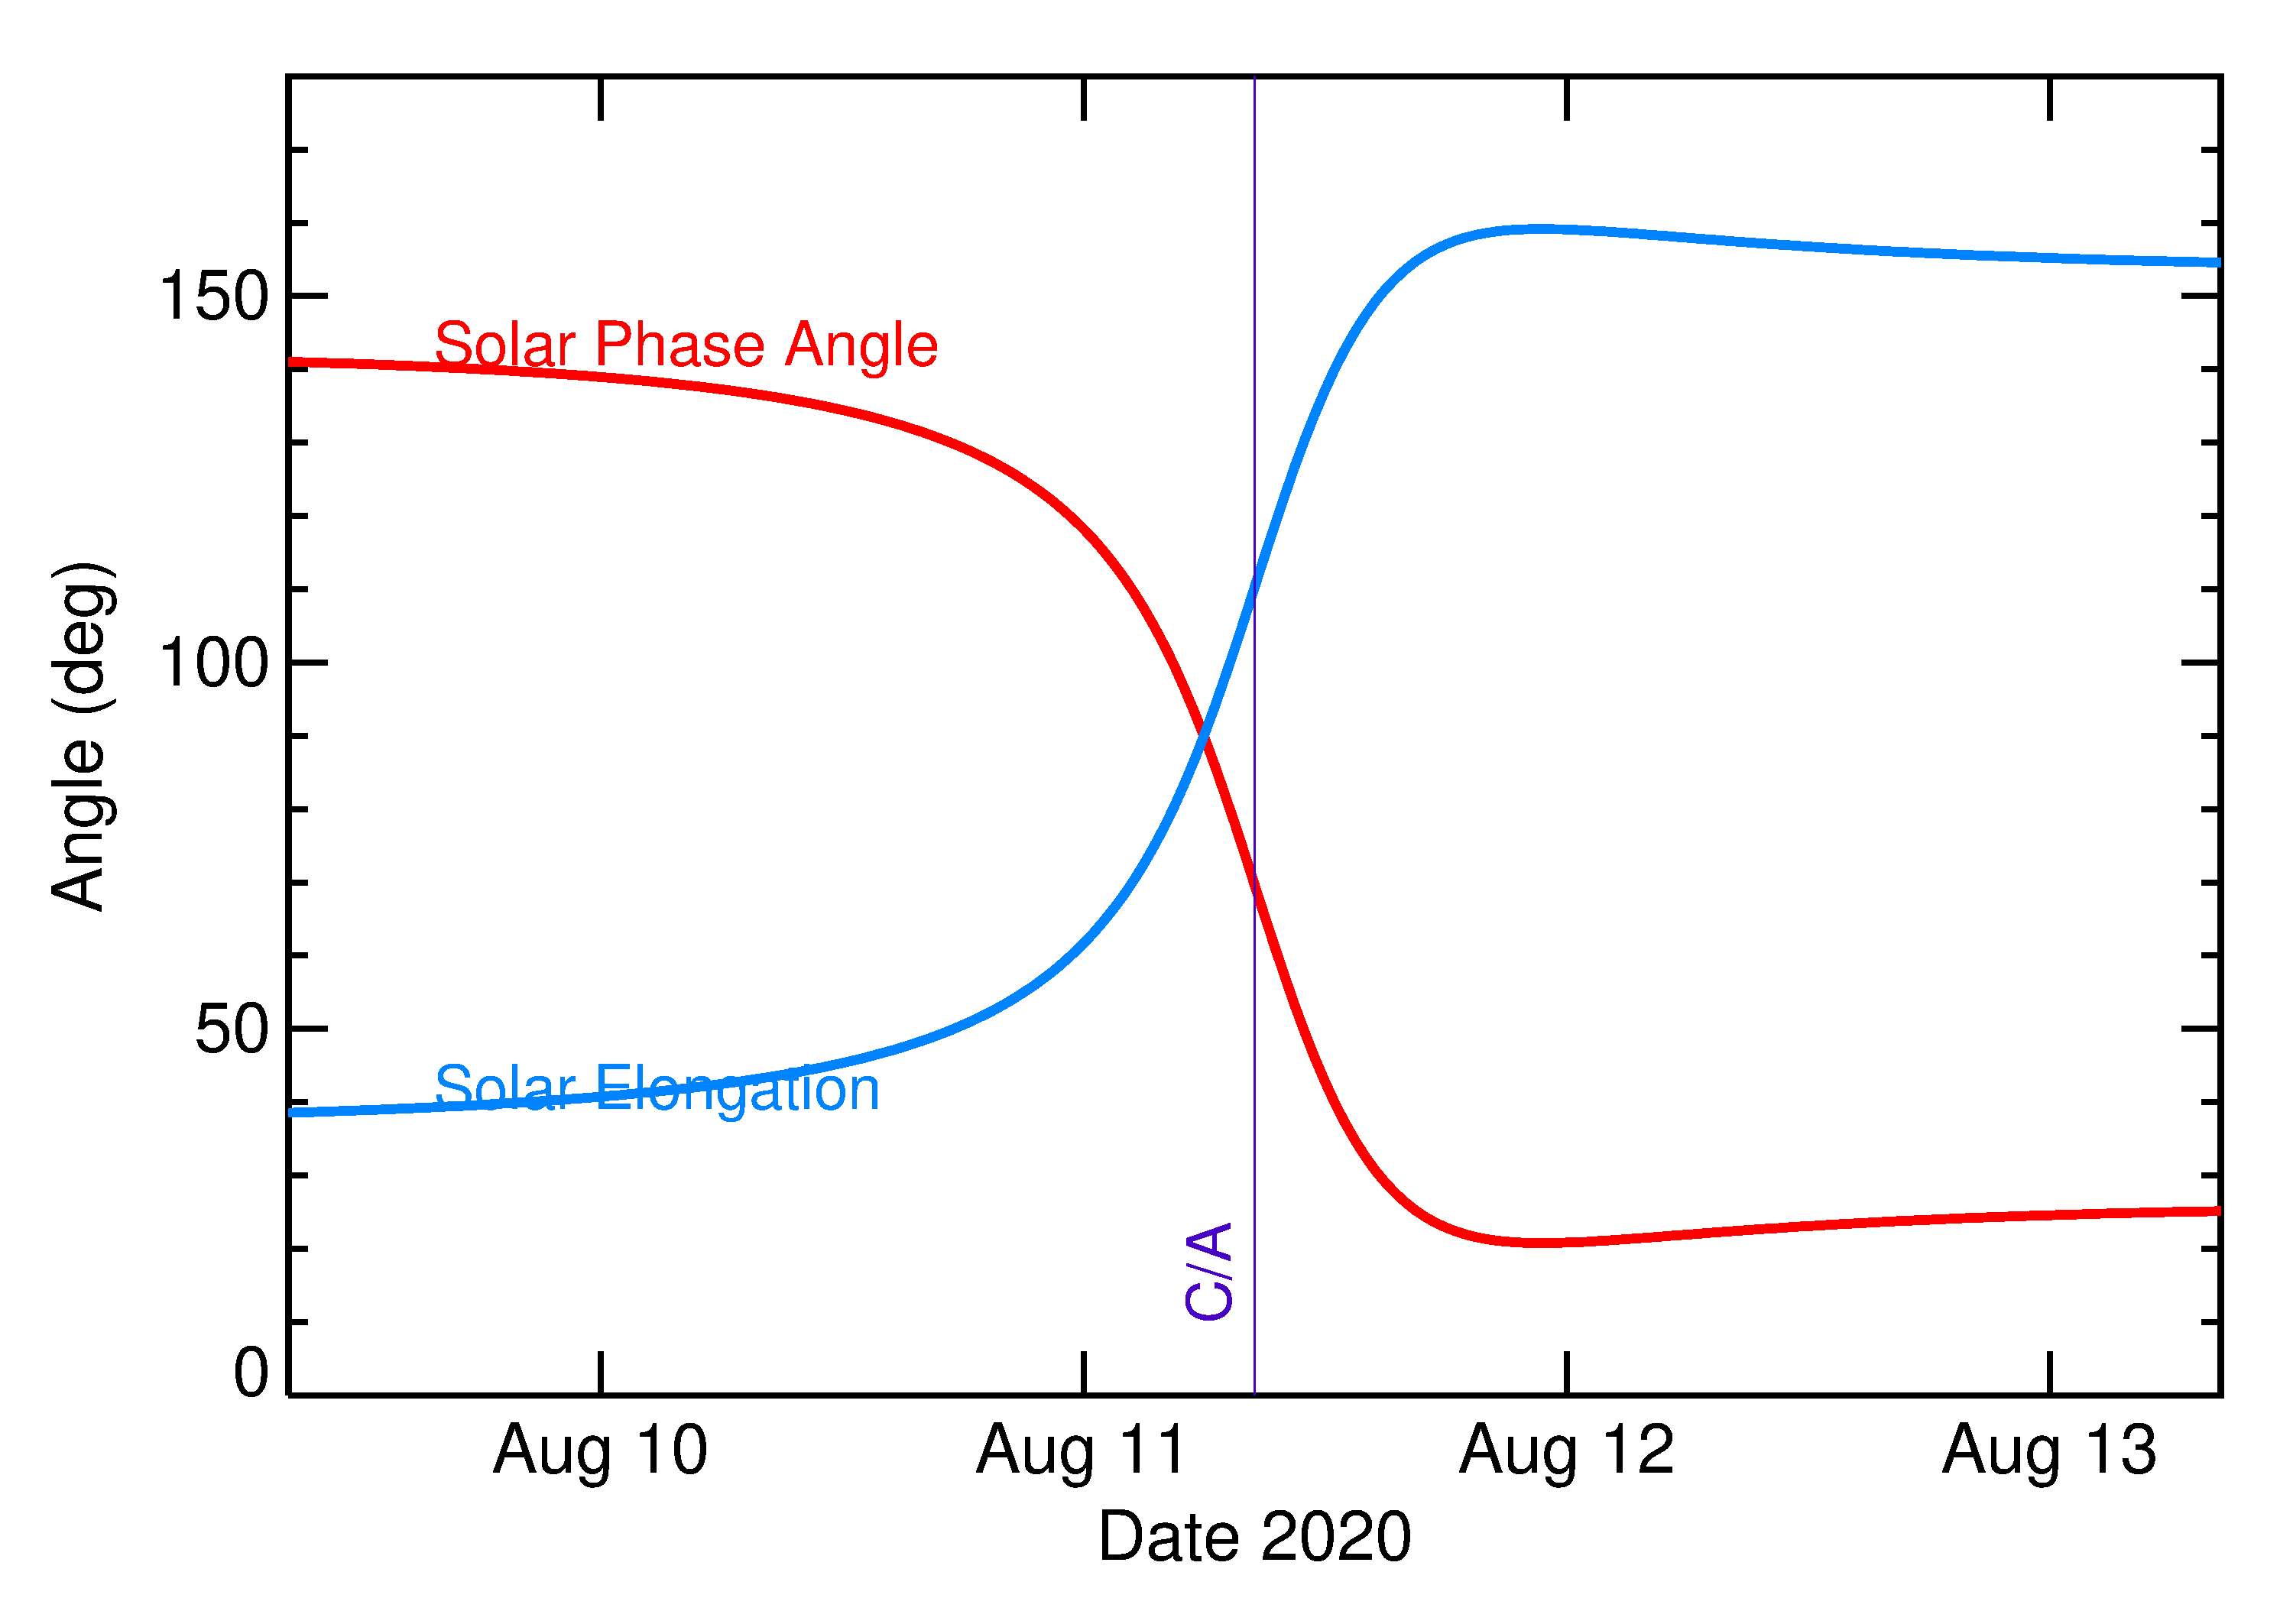 Solar Elongation and Solar Phase Angle of 2020 PX5 in the days around closest approach